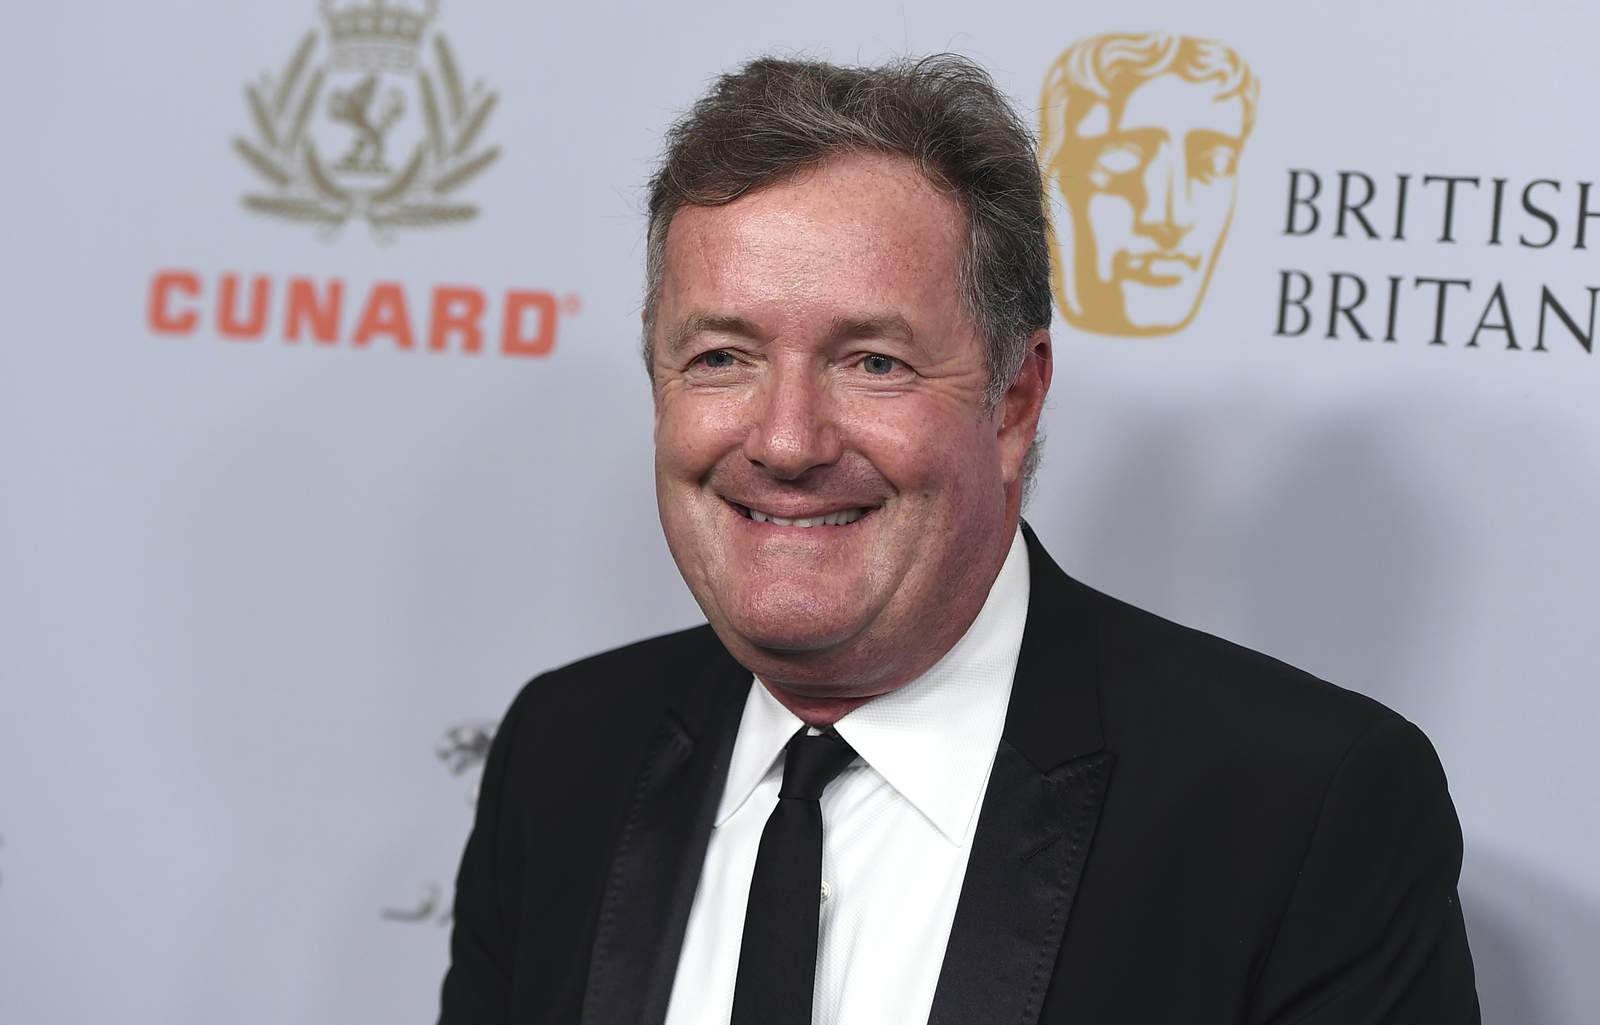 Piers Morgan quits talk show after comments about Meghan